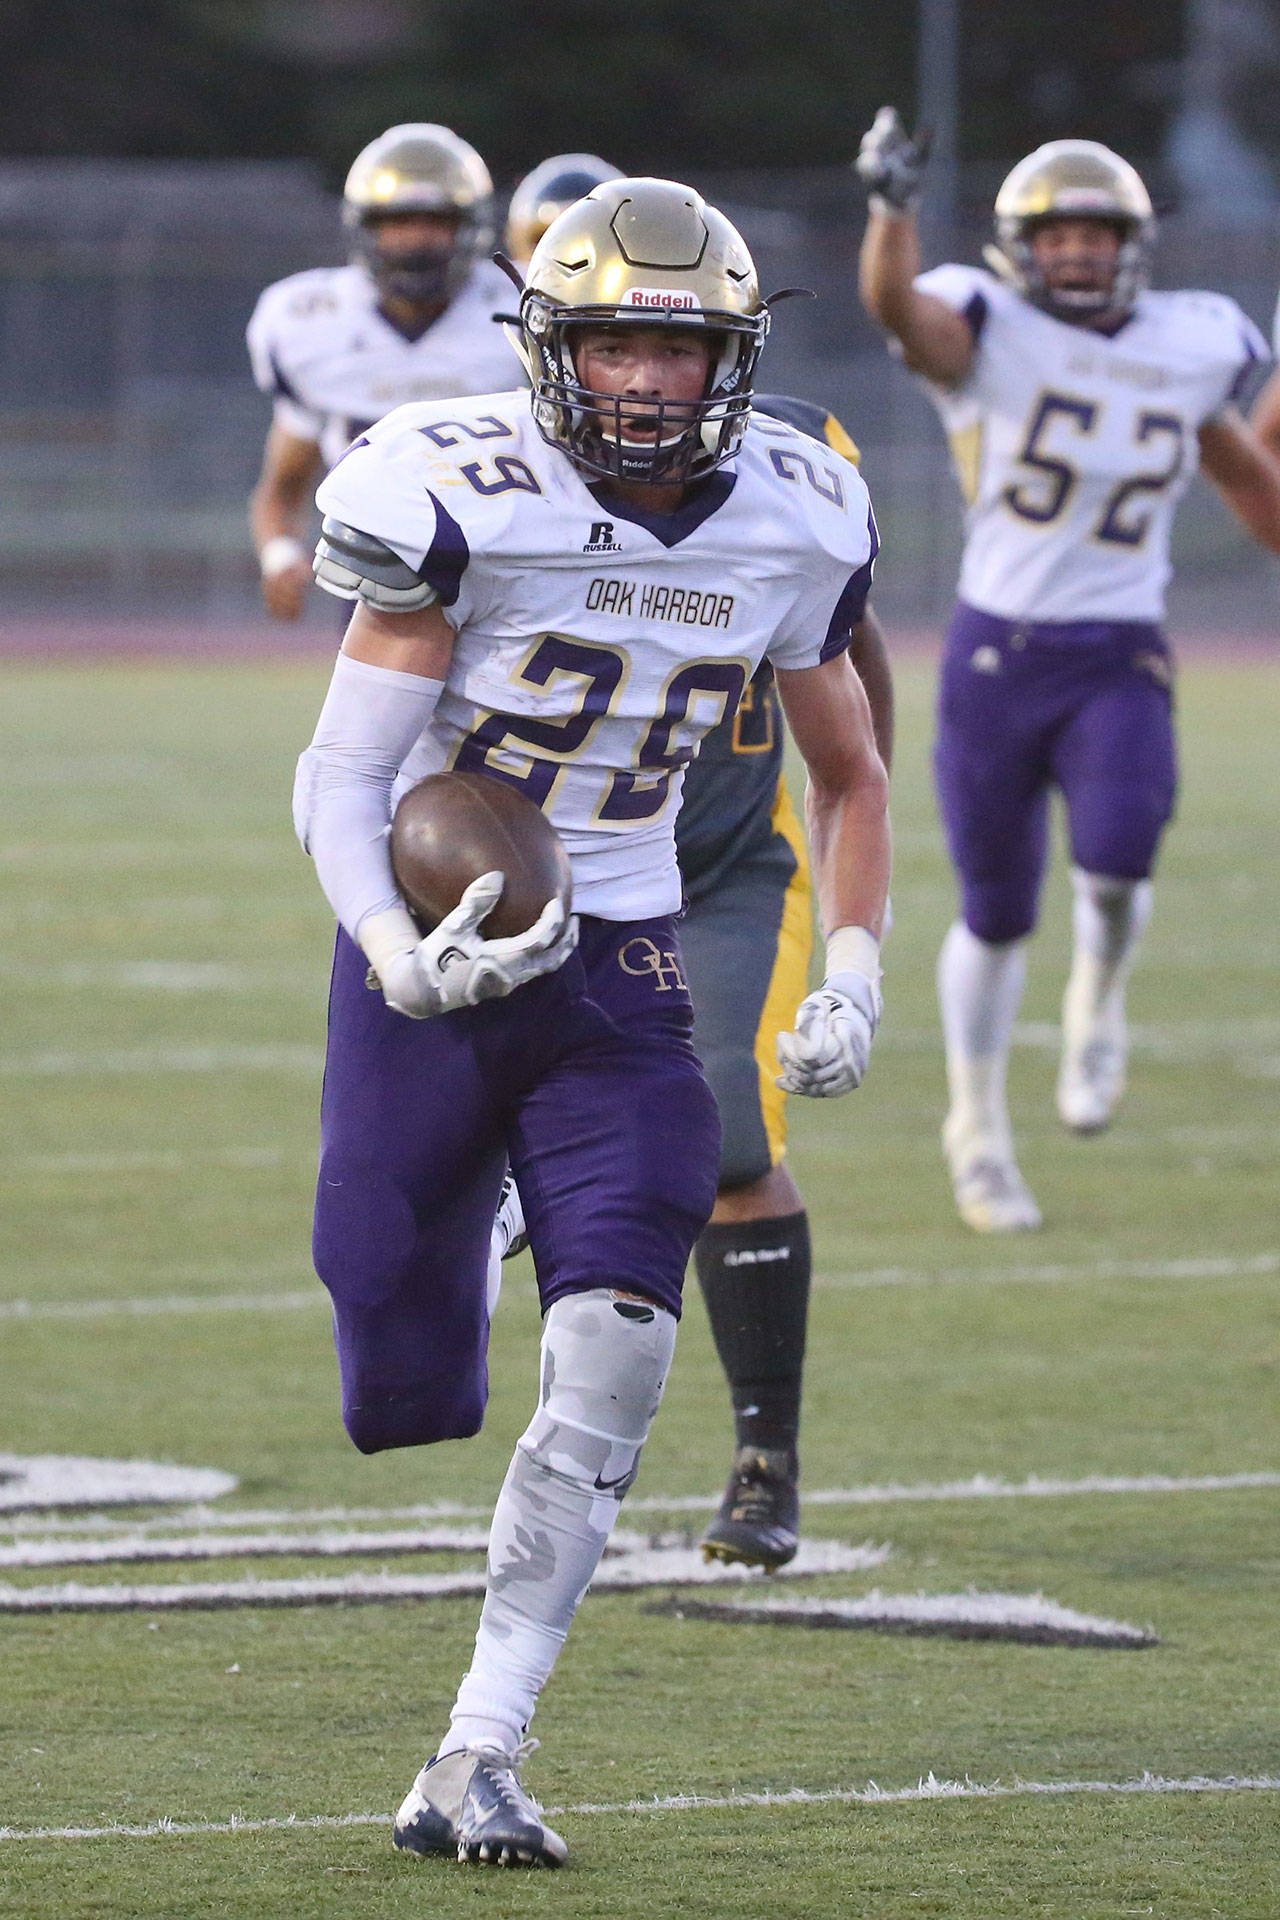 Mac Nuanez races for a 44-yard TD. Nuanez finished with 163 rushing yards and three touchdowns. (Photo by John Fisken)